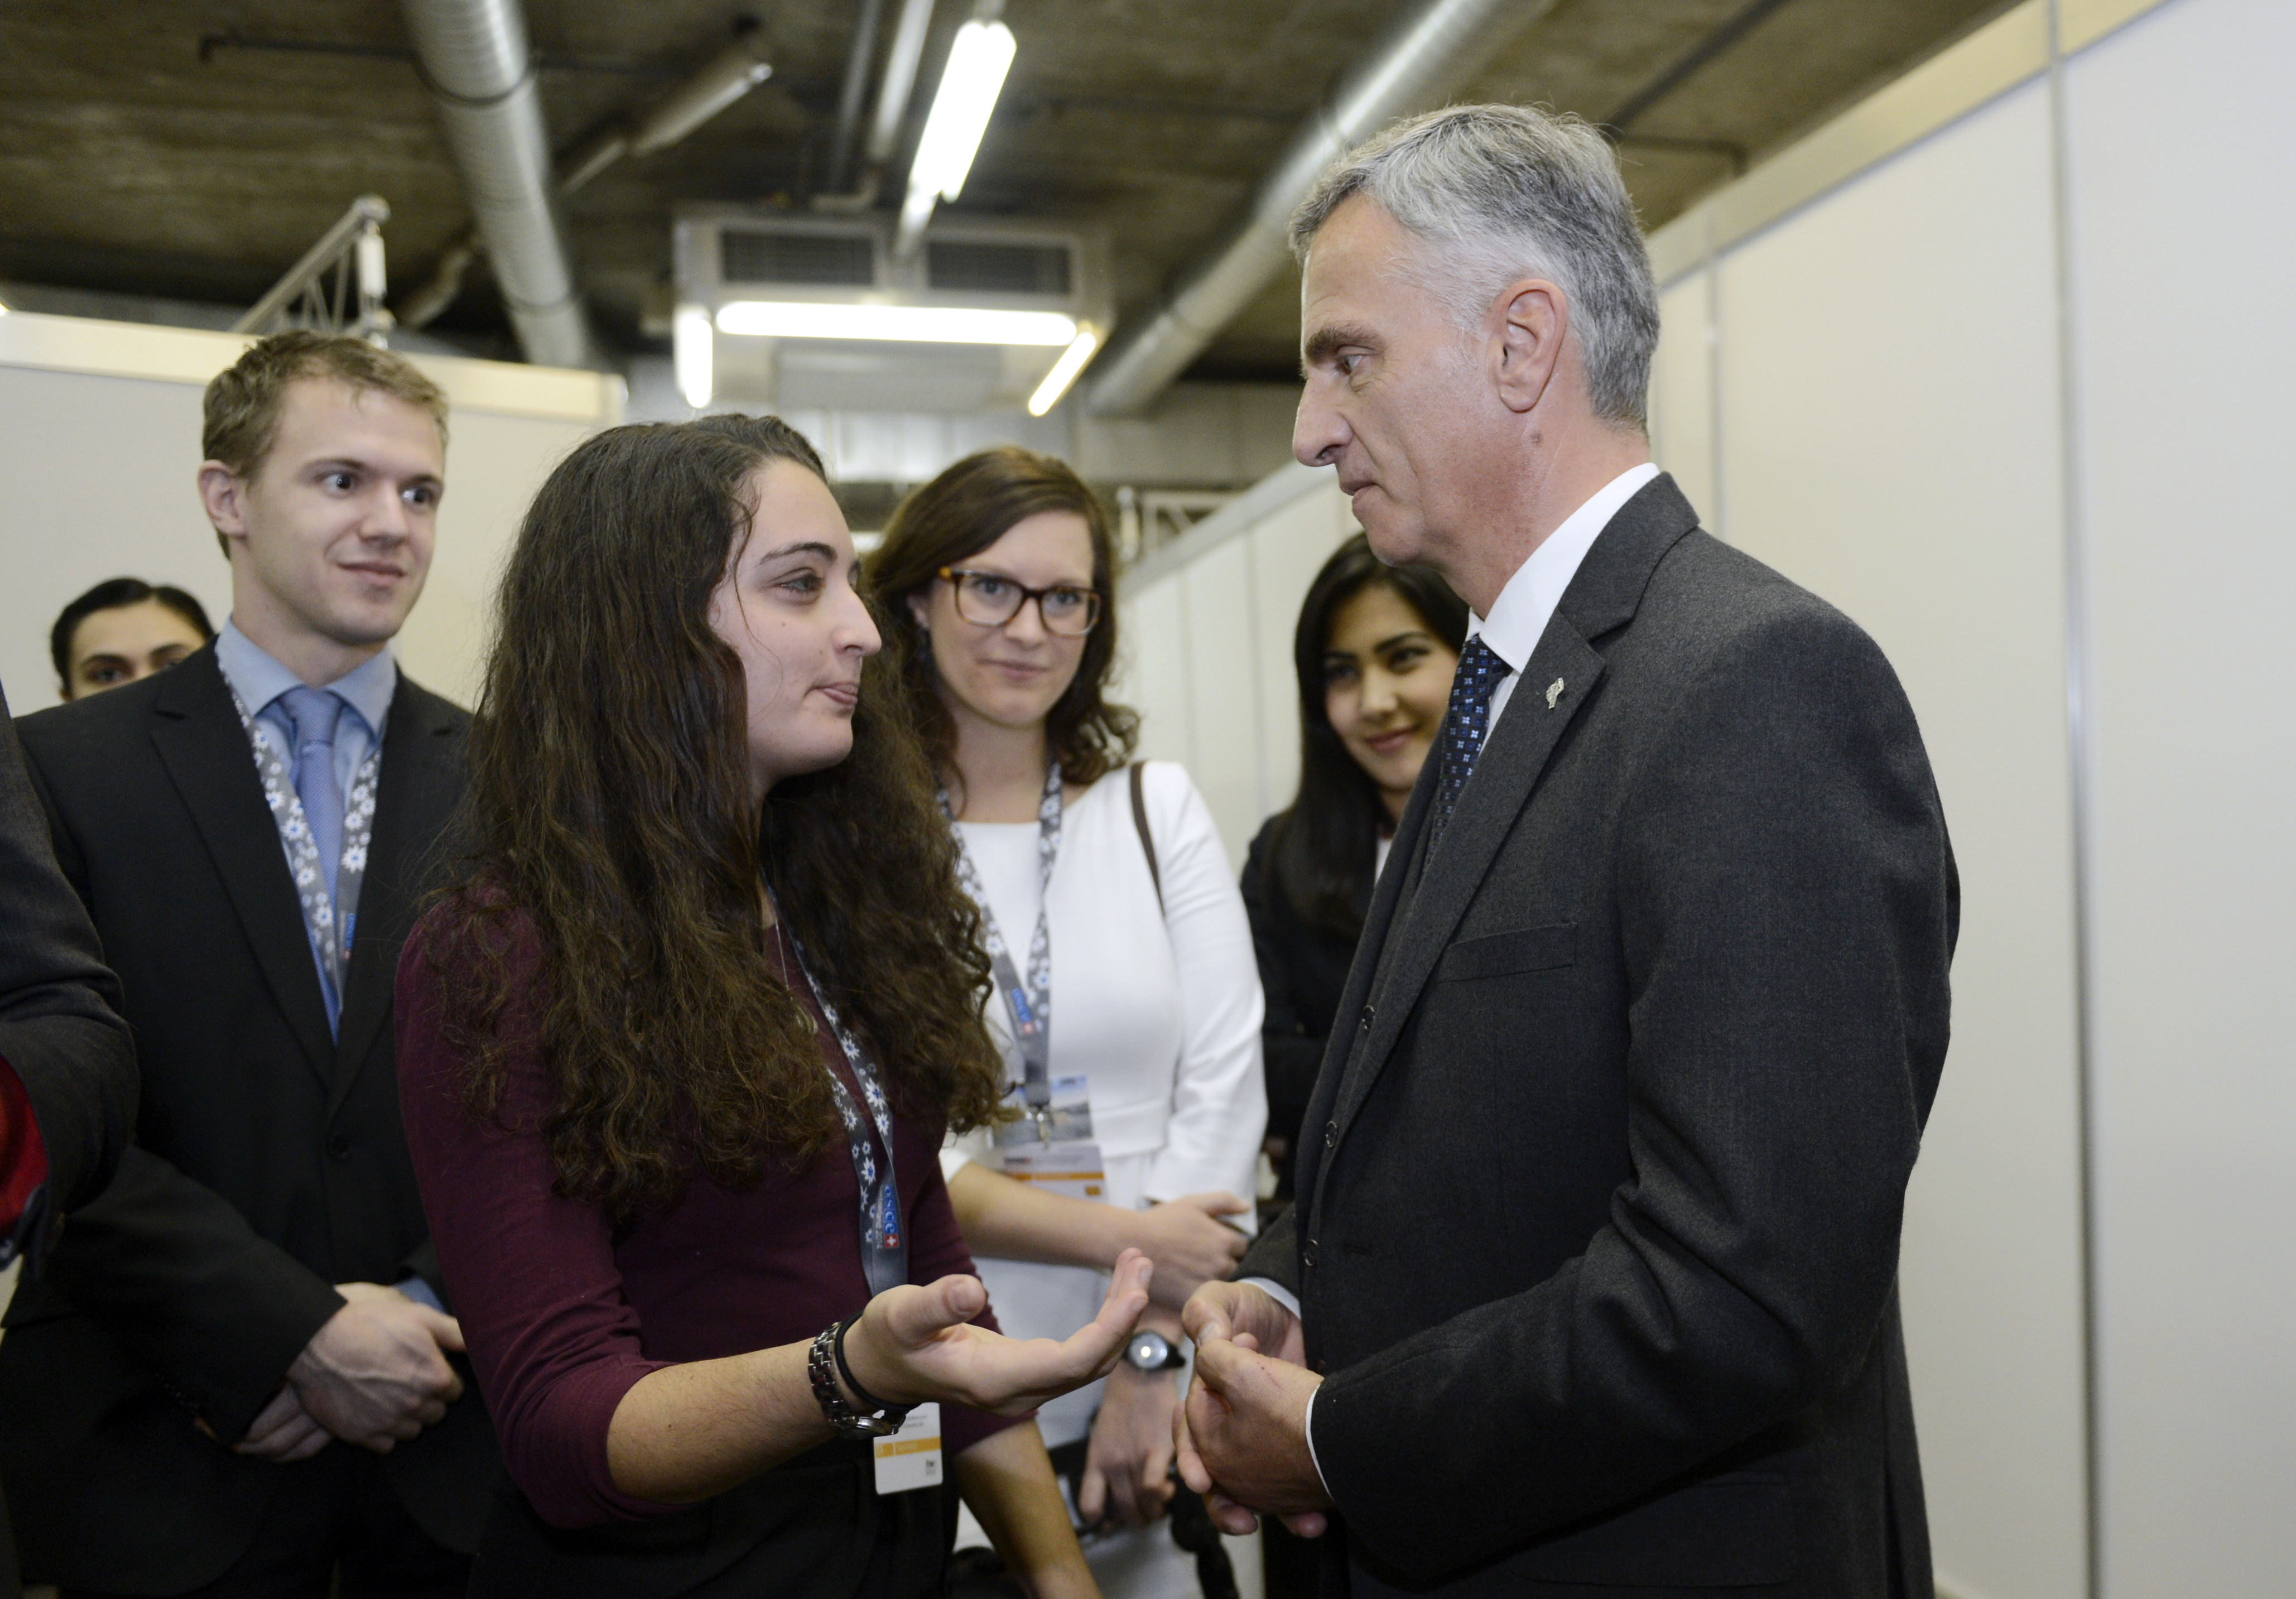 Federal Councillor Didier Burkhalter meeting youth ambassadors on the margins of the 2014 Ministerial Council meeting in Basel.